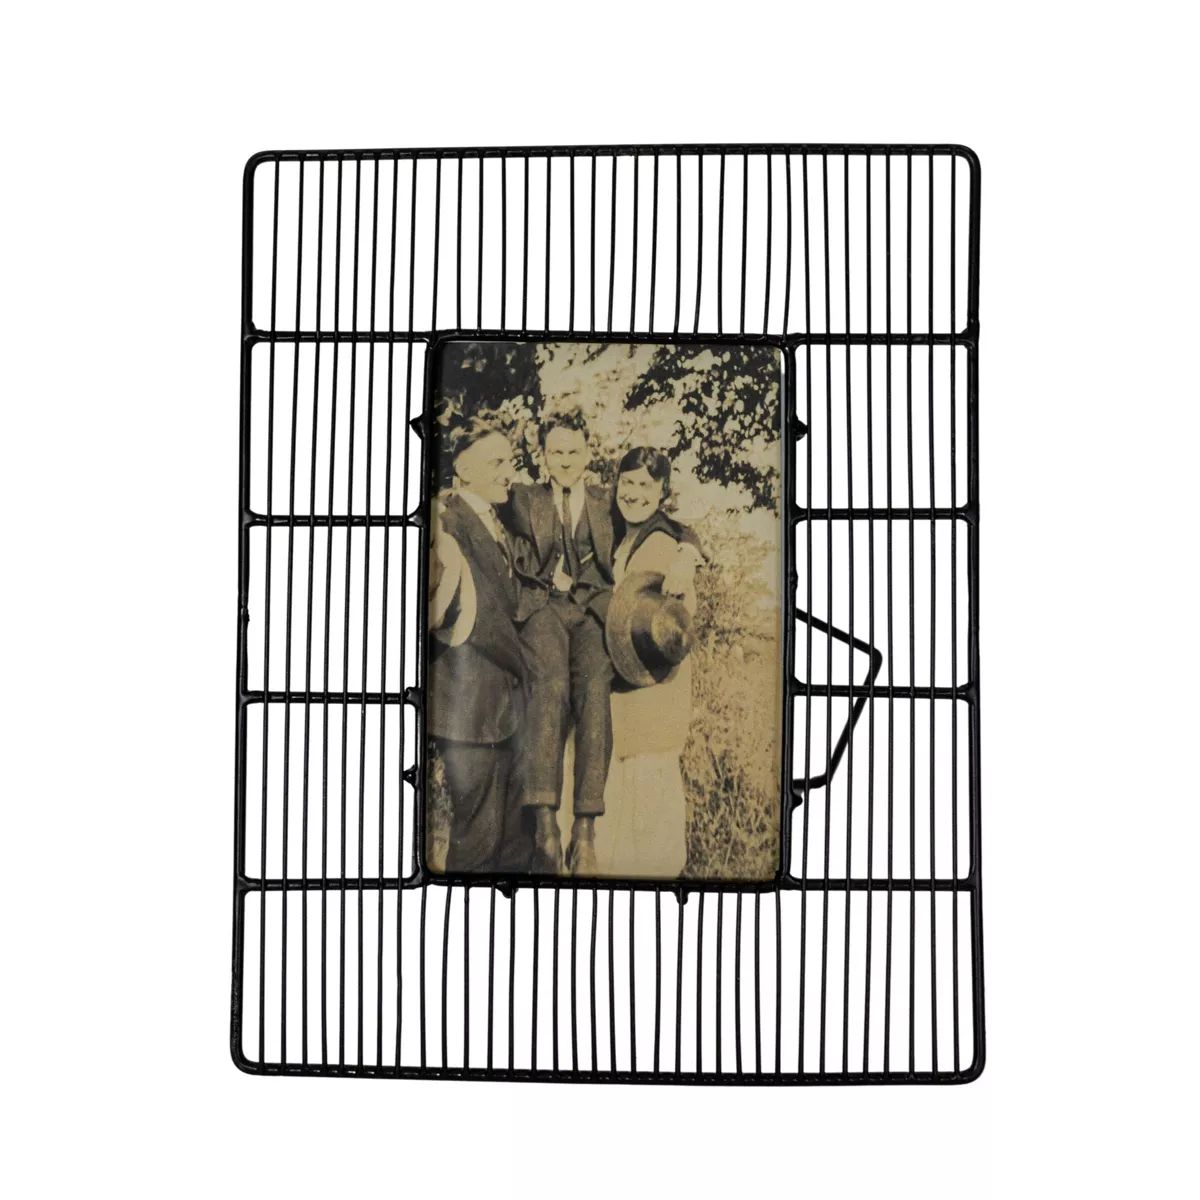 4X6 Inch Picture Frame Black Metal & Glass by Foreside Home & Garden | Target